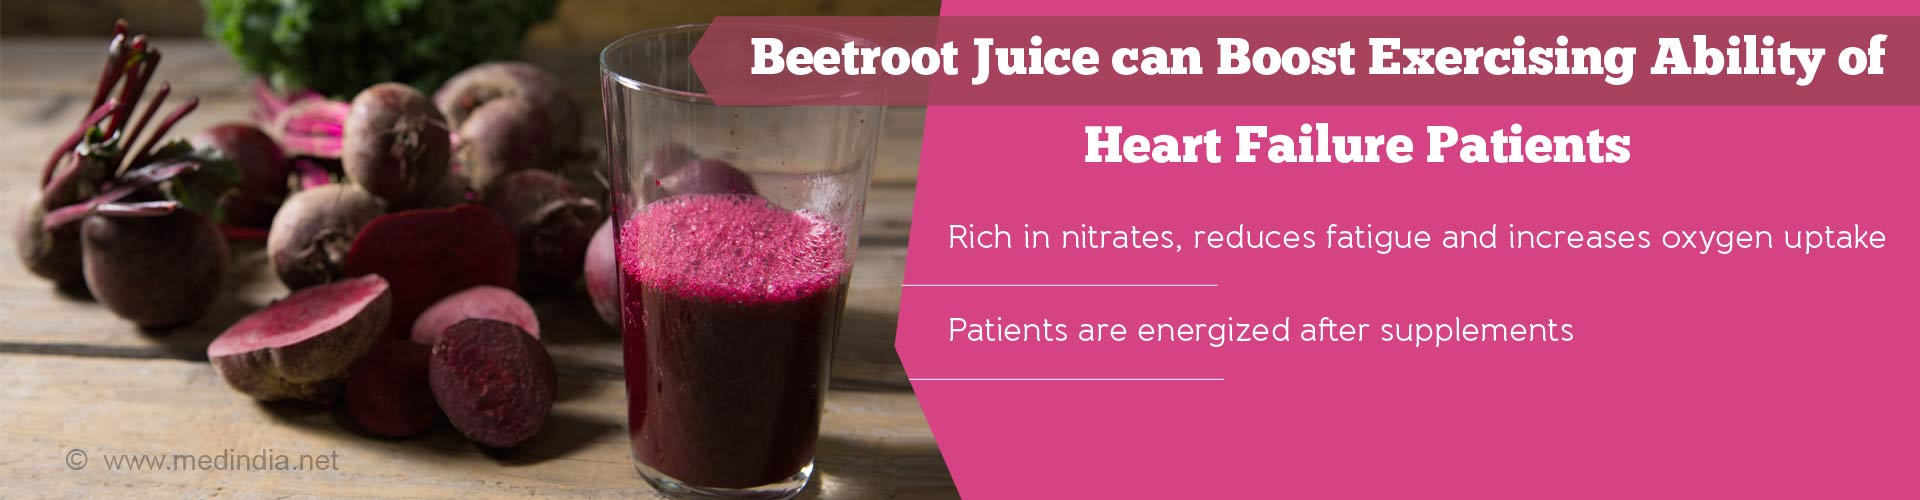 beetroot juice can boost exercising ability of heart failure patients
- rich in nitrates, reduces fatigue and increases oxygen uptake
- patients are energized after supplements